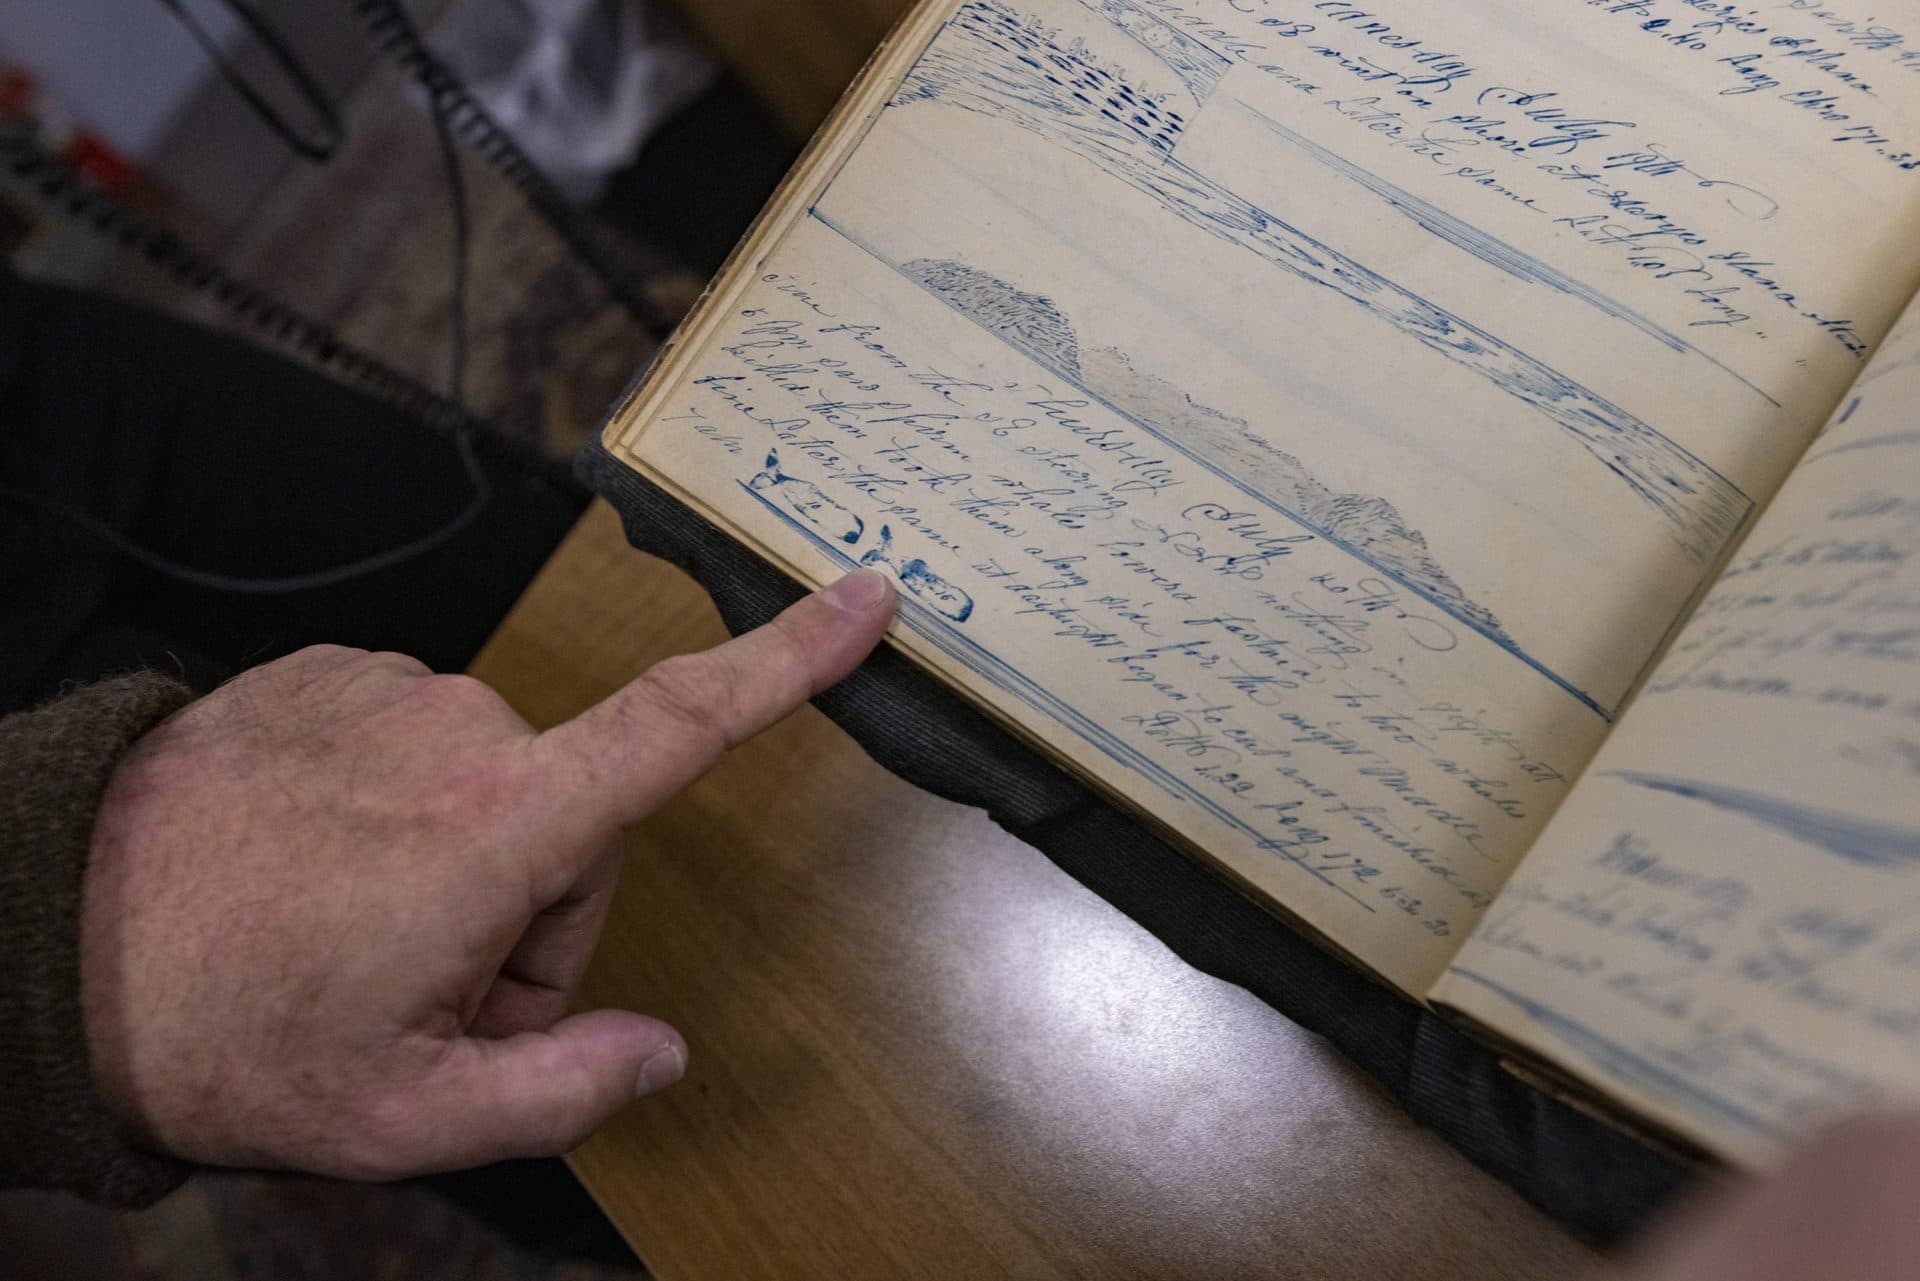 Some of the log books have intricate drawings of physical details, notes of things seen during the voyages of the ships. Here, Timothy Walker, history professor at UMass Darmouth, points out a day where the Ship Lion captured two whales which is marked by using a whale stamp. (Jesse Costa/WBUR)